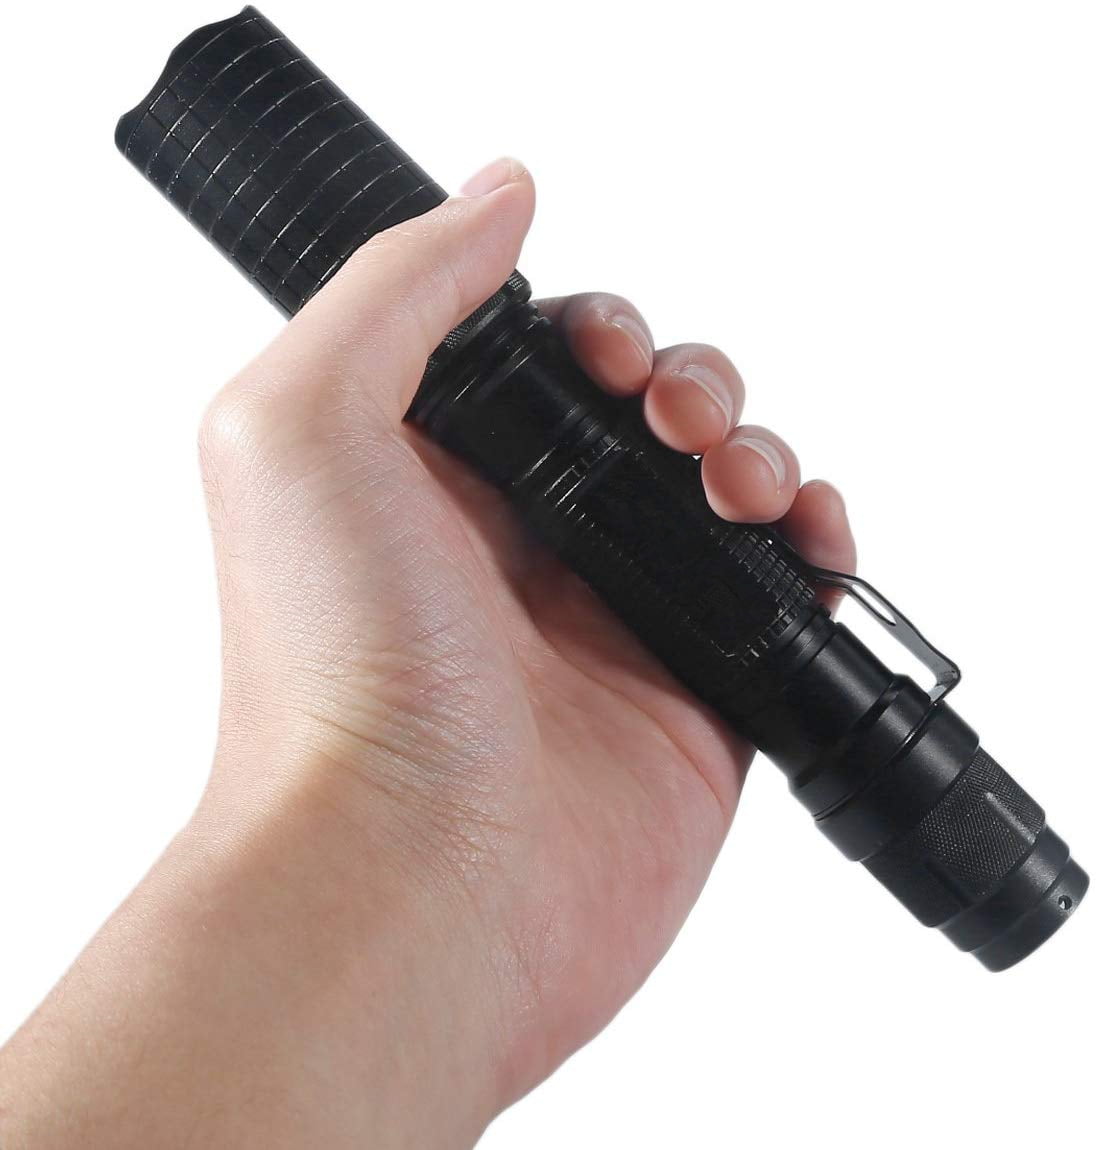 Details about  / Powerful T6 LED Flashlight Tactical Zoomable Torch Rechargeable Battery/&Charger